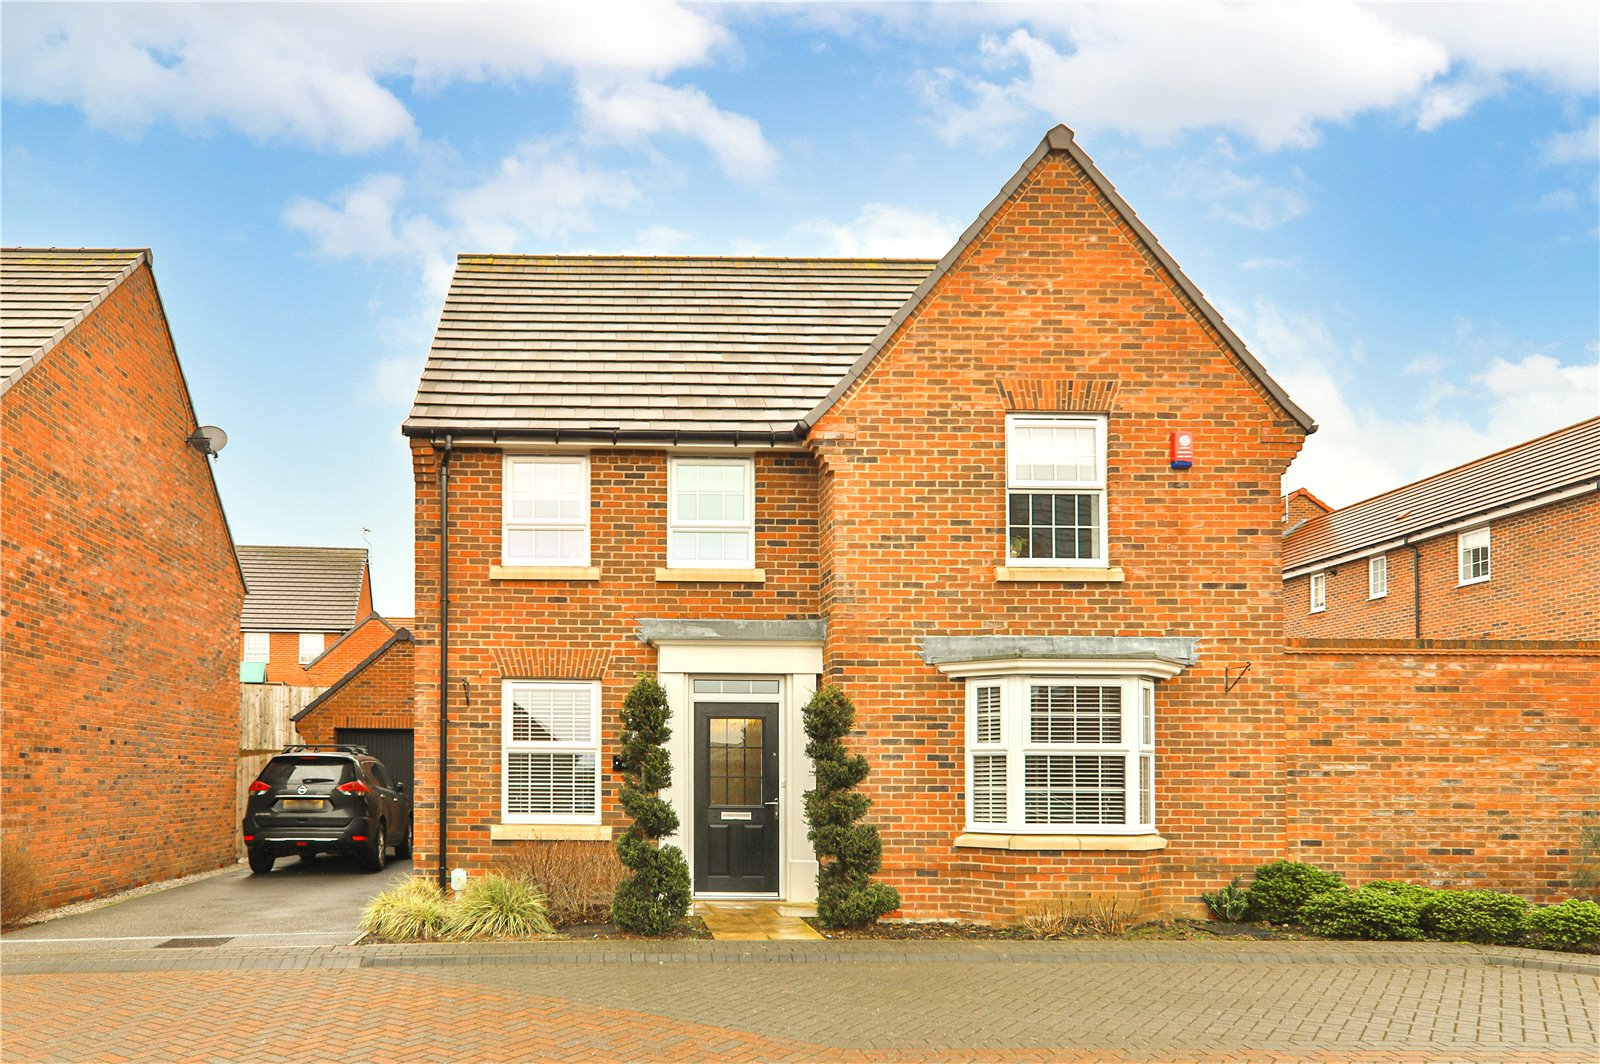 4 bed house for sale in Foxglove Way, Beverley  - Property Image 1